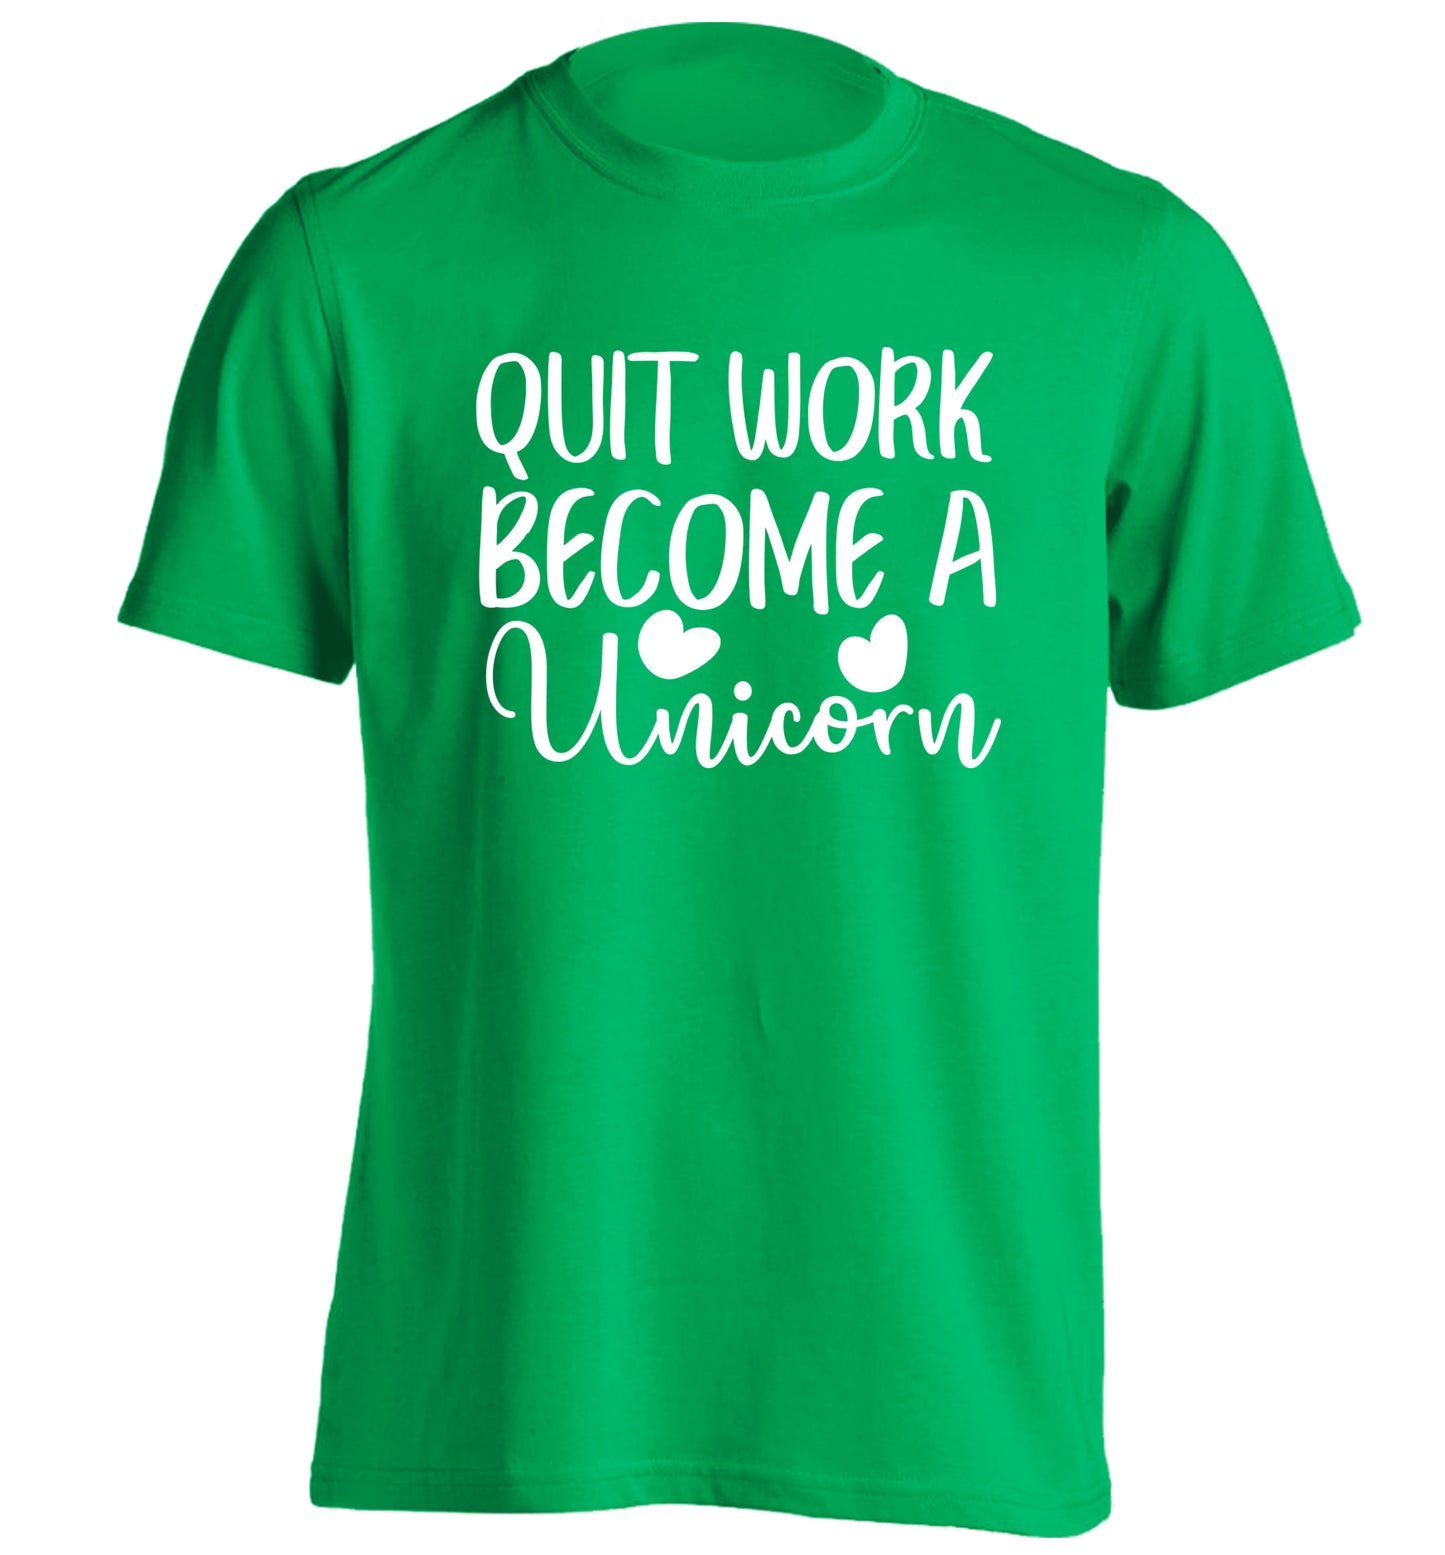 Quit work become a unicorn adults unisex green Tshirt 2XL